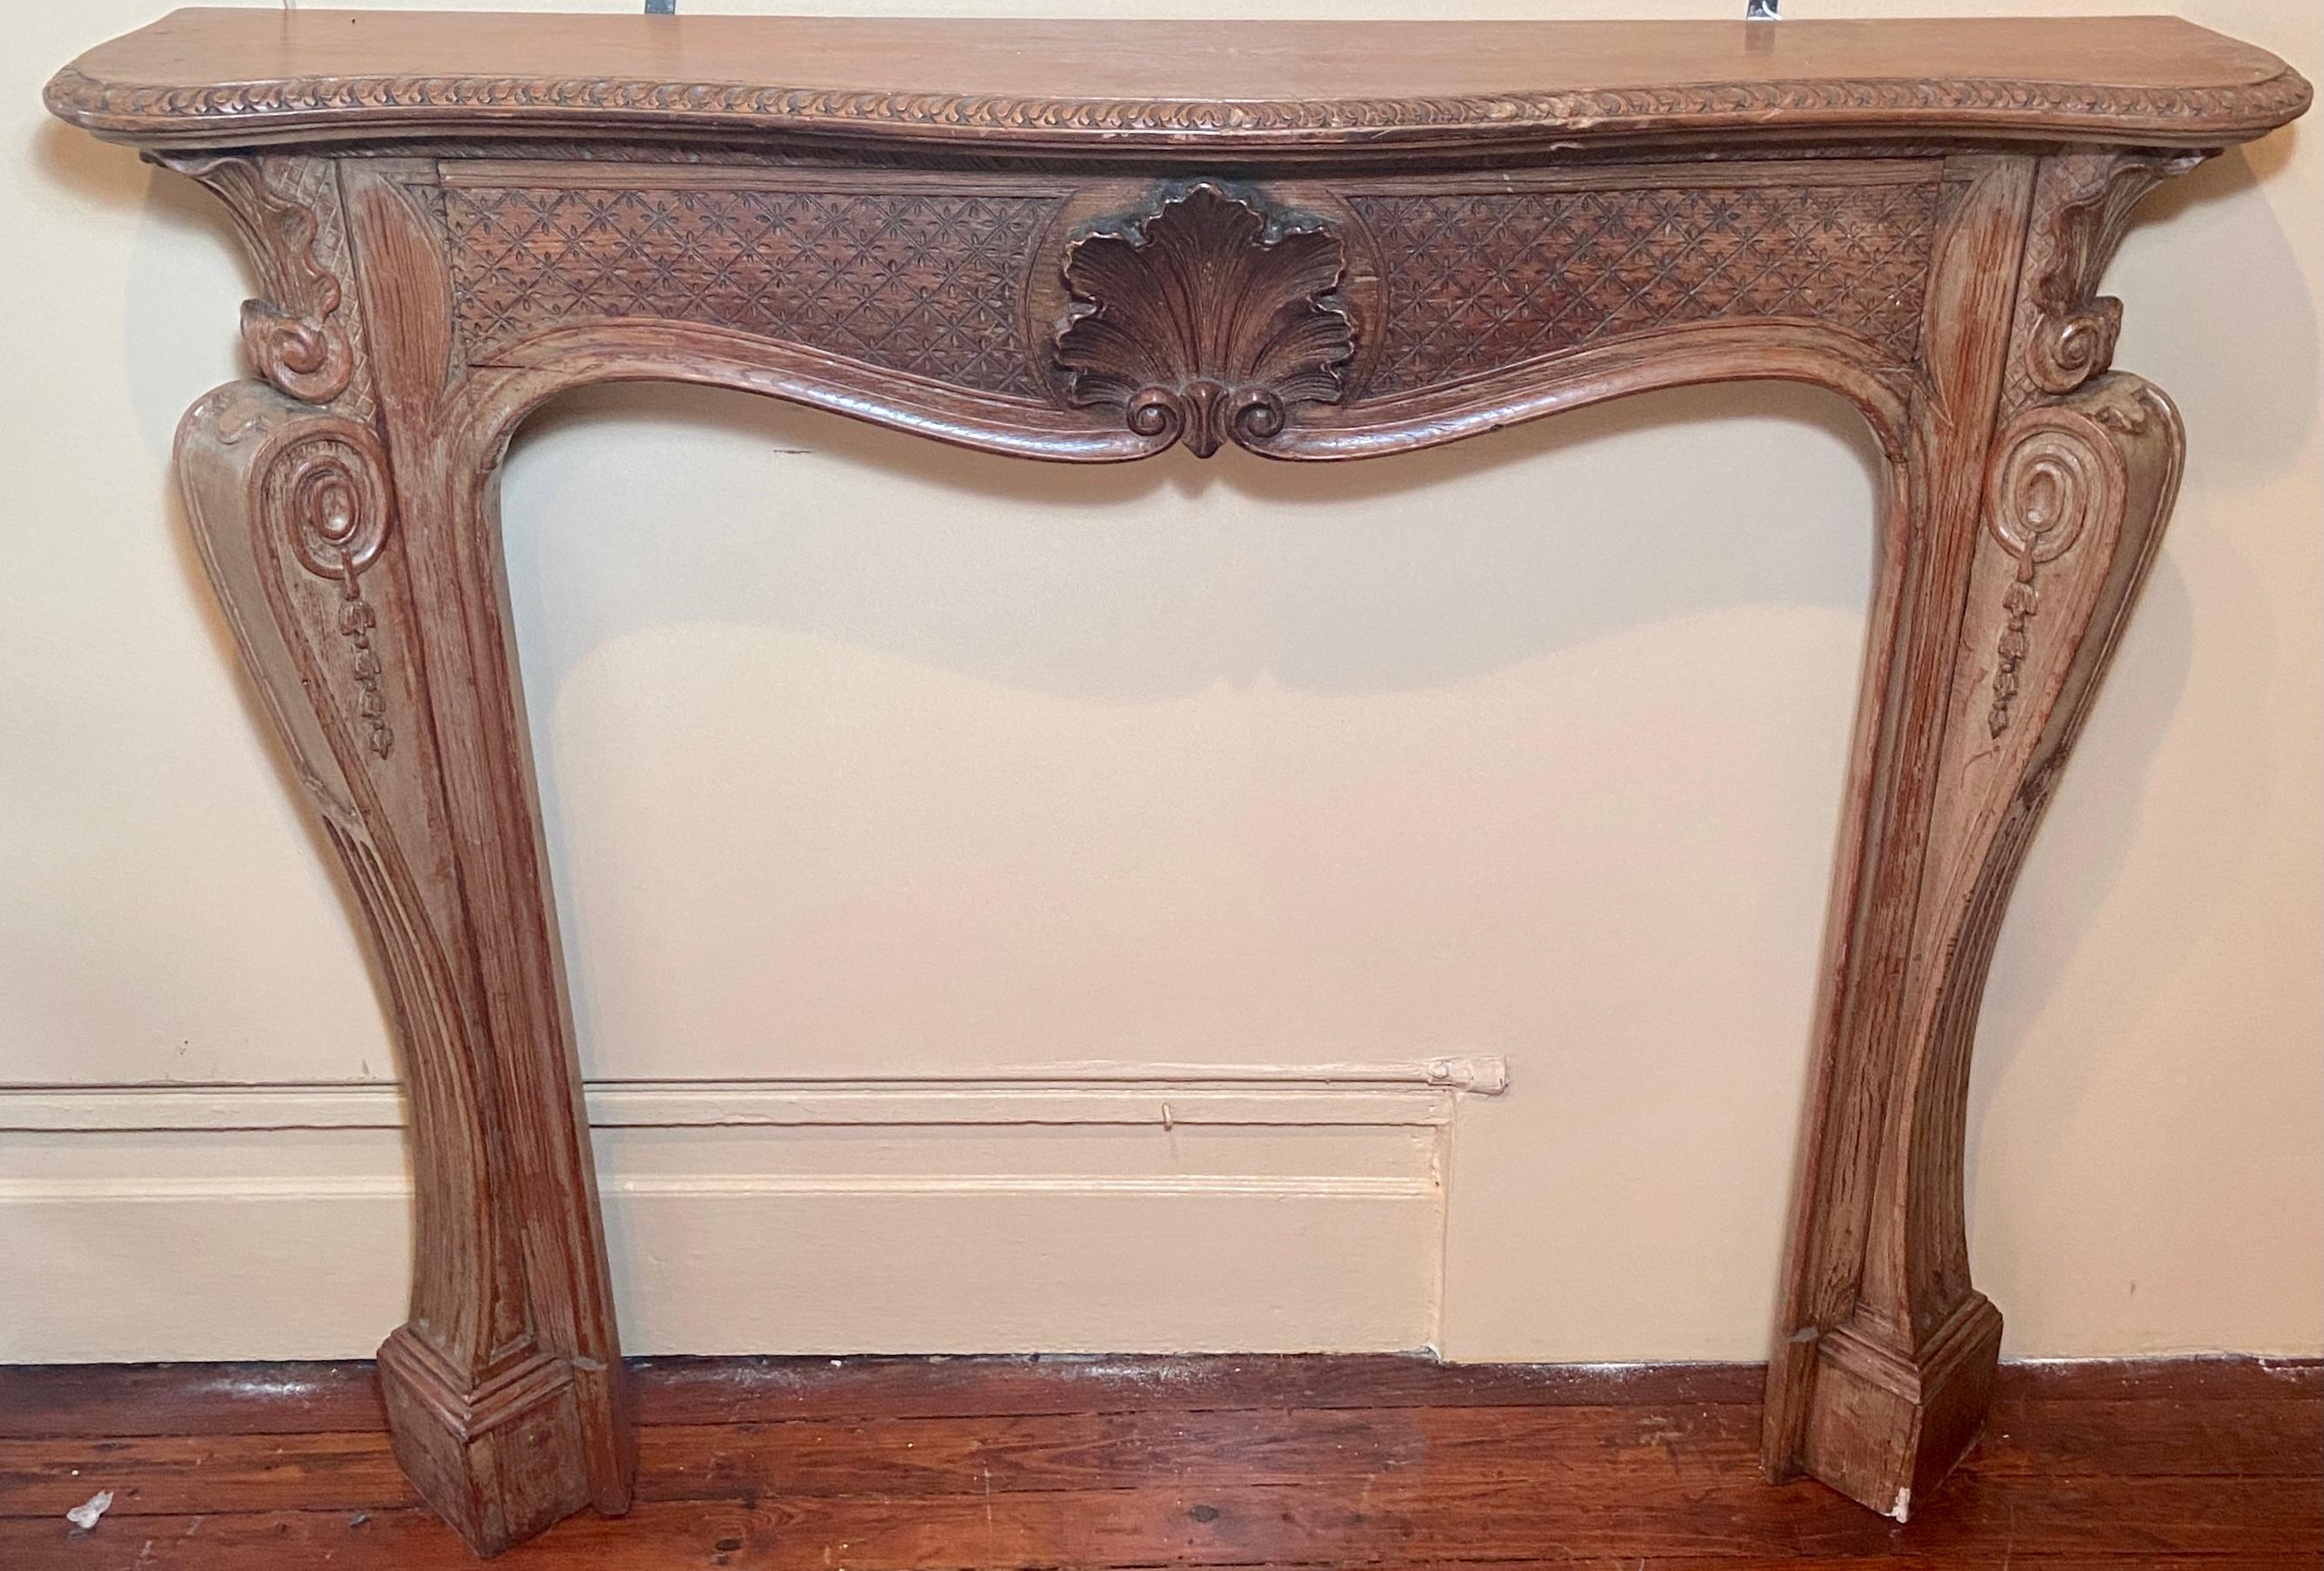 Antique French carved pine mantlepiece, Circa 1920-1930. Beautifully detailed carving.